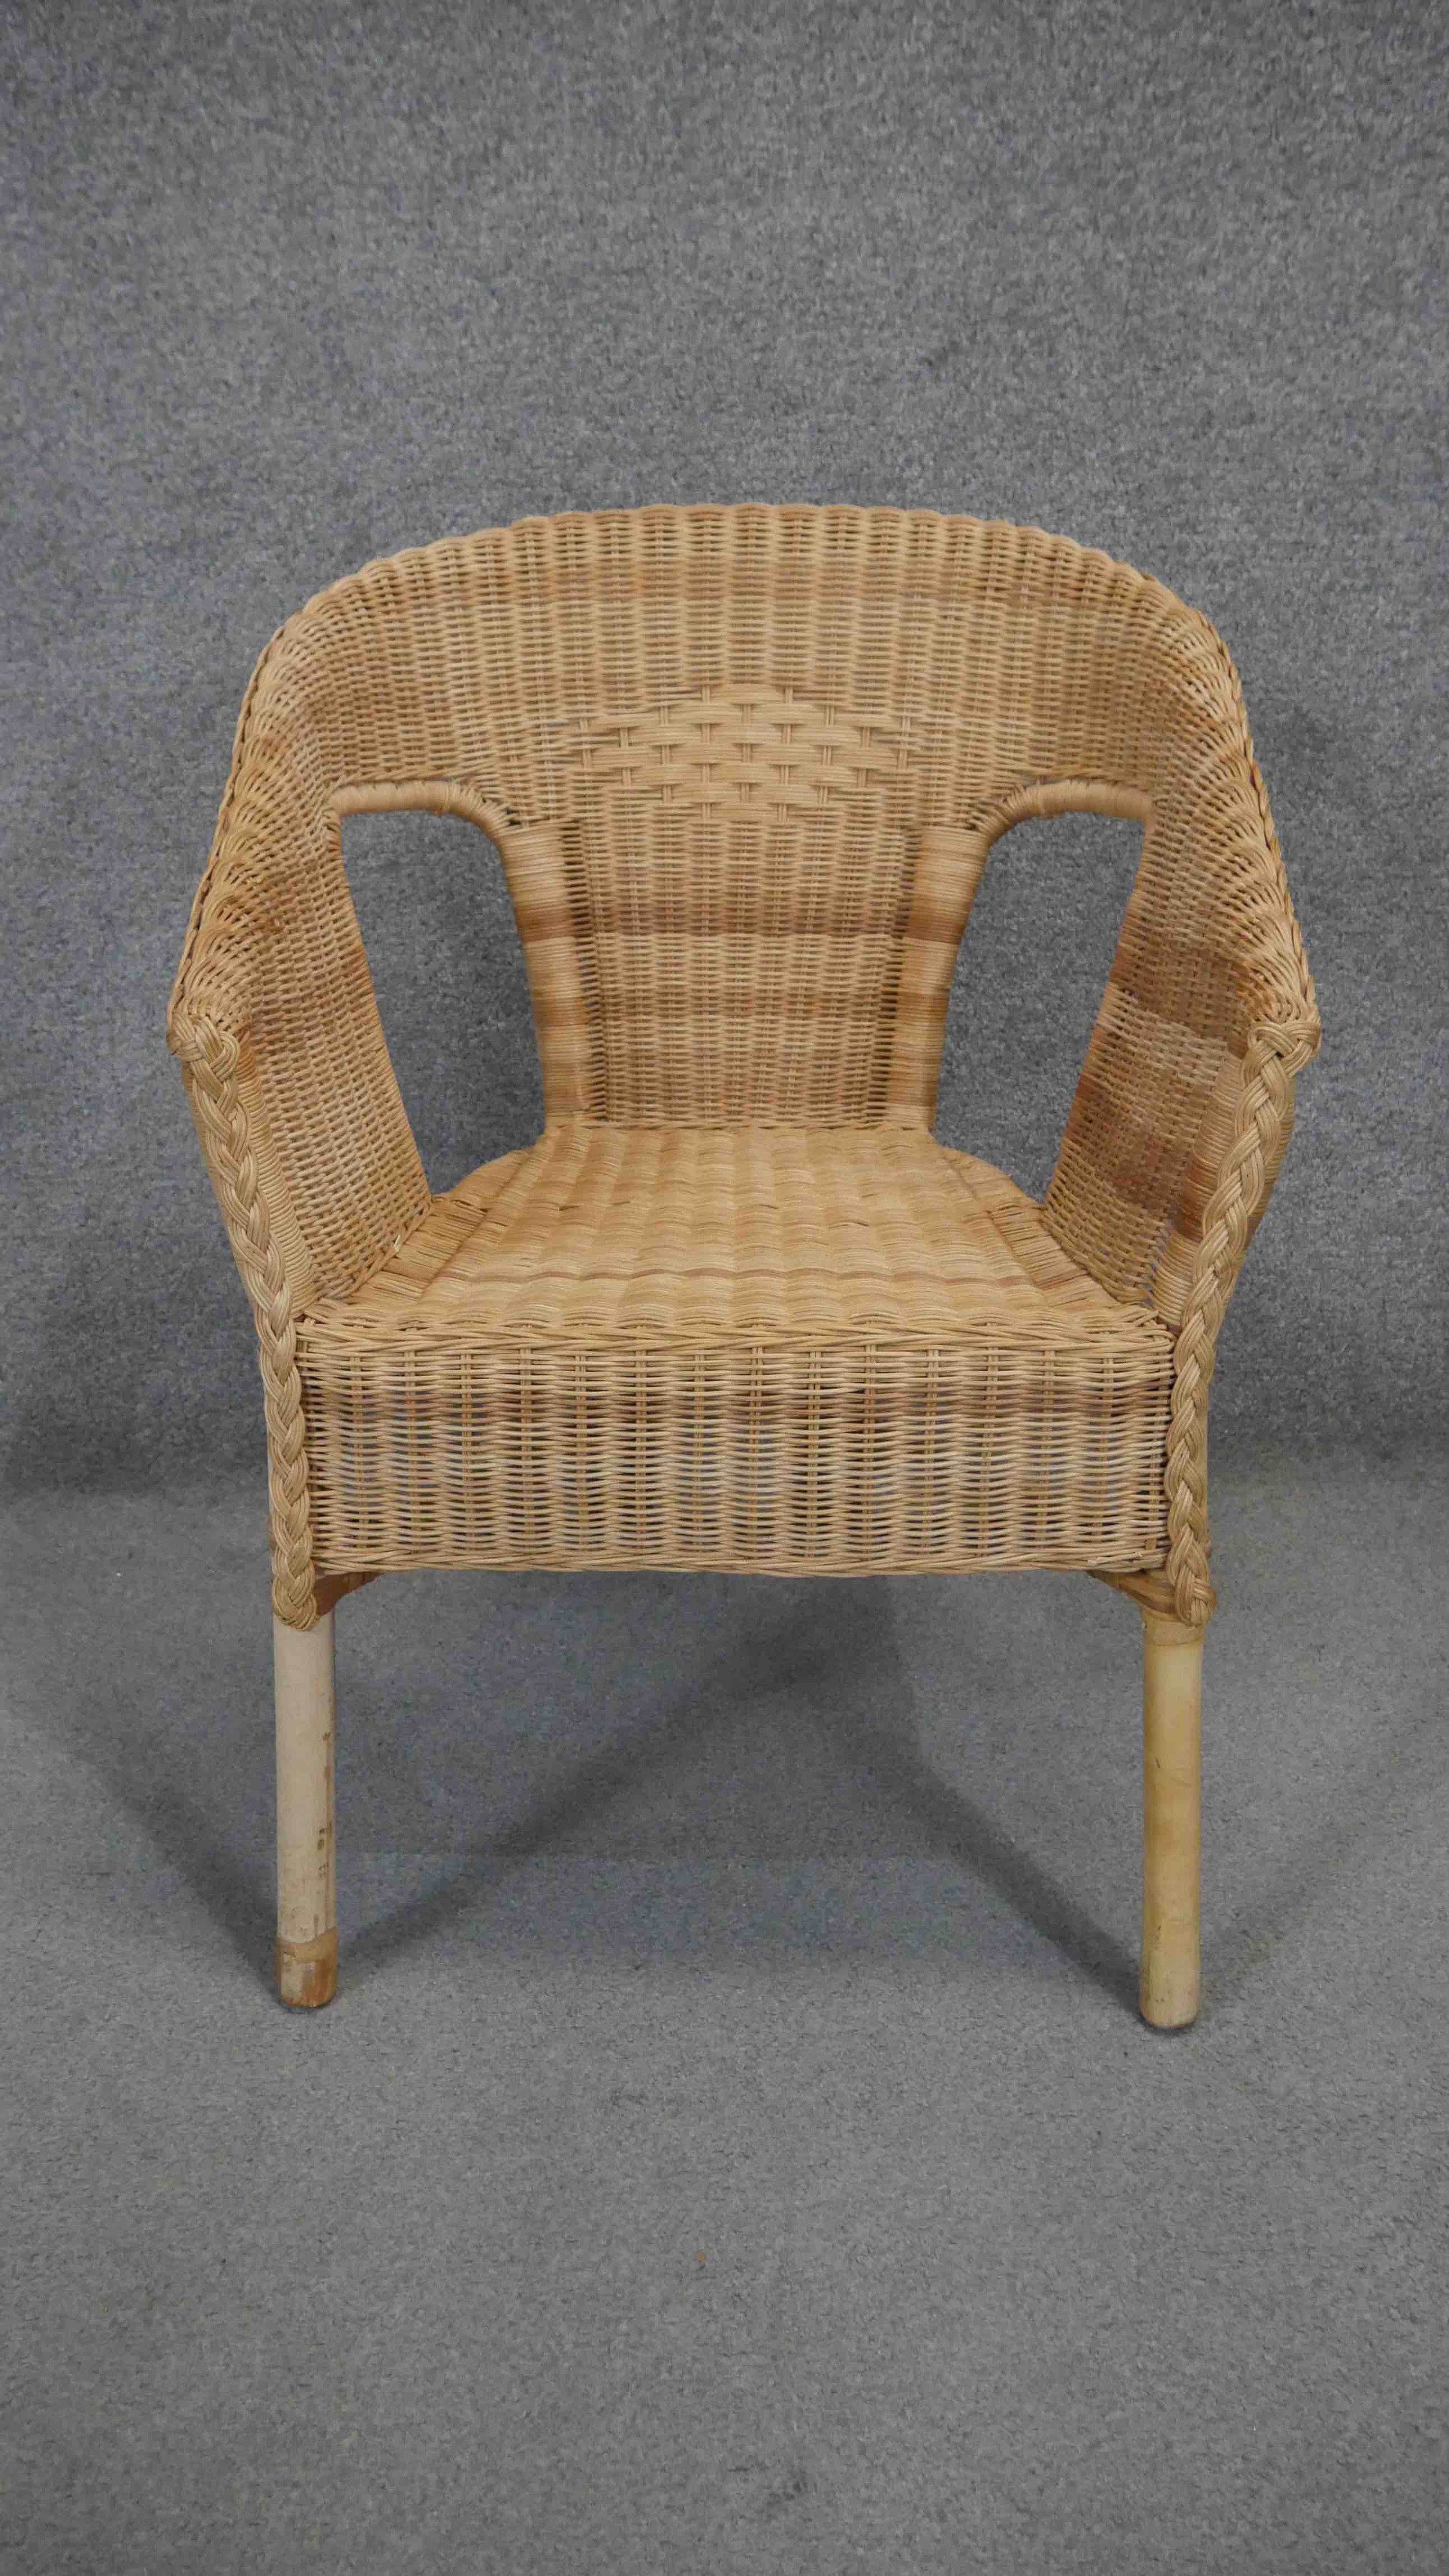 Two wicker conservatory chairs along with a vintage loom armchair. - Image 2 of 11